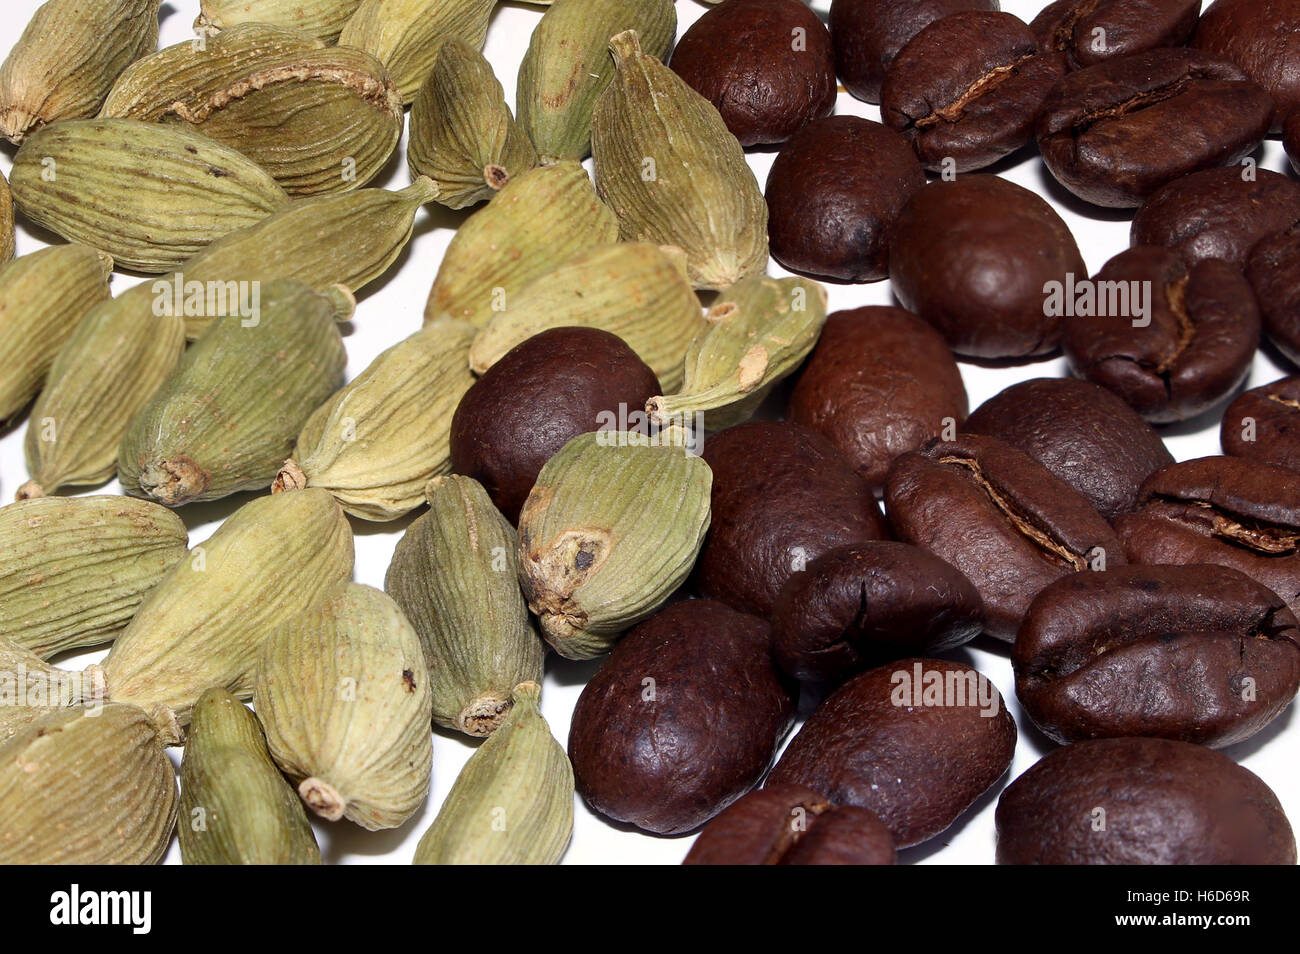 Cardamon and coffee beans close-up background Stock Photo